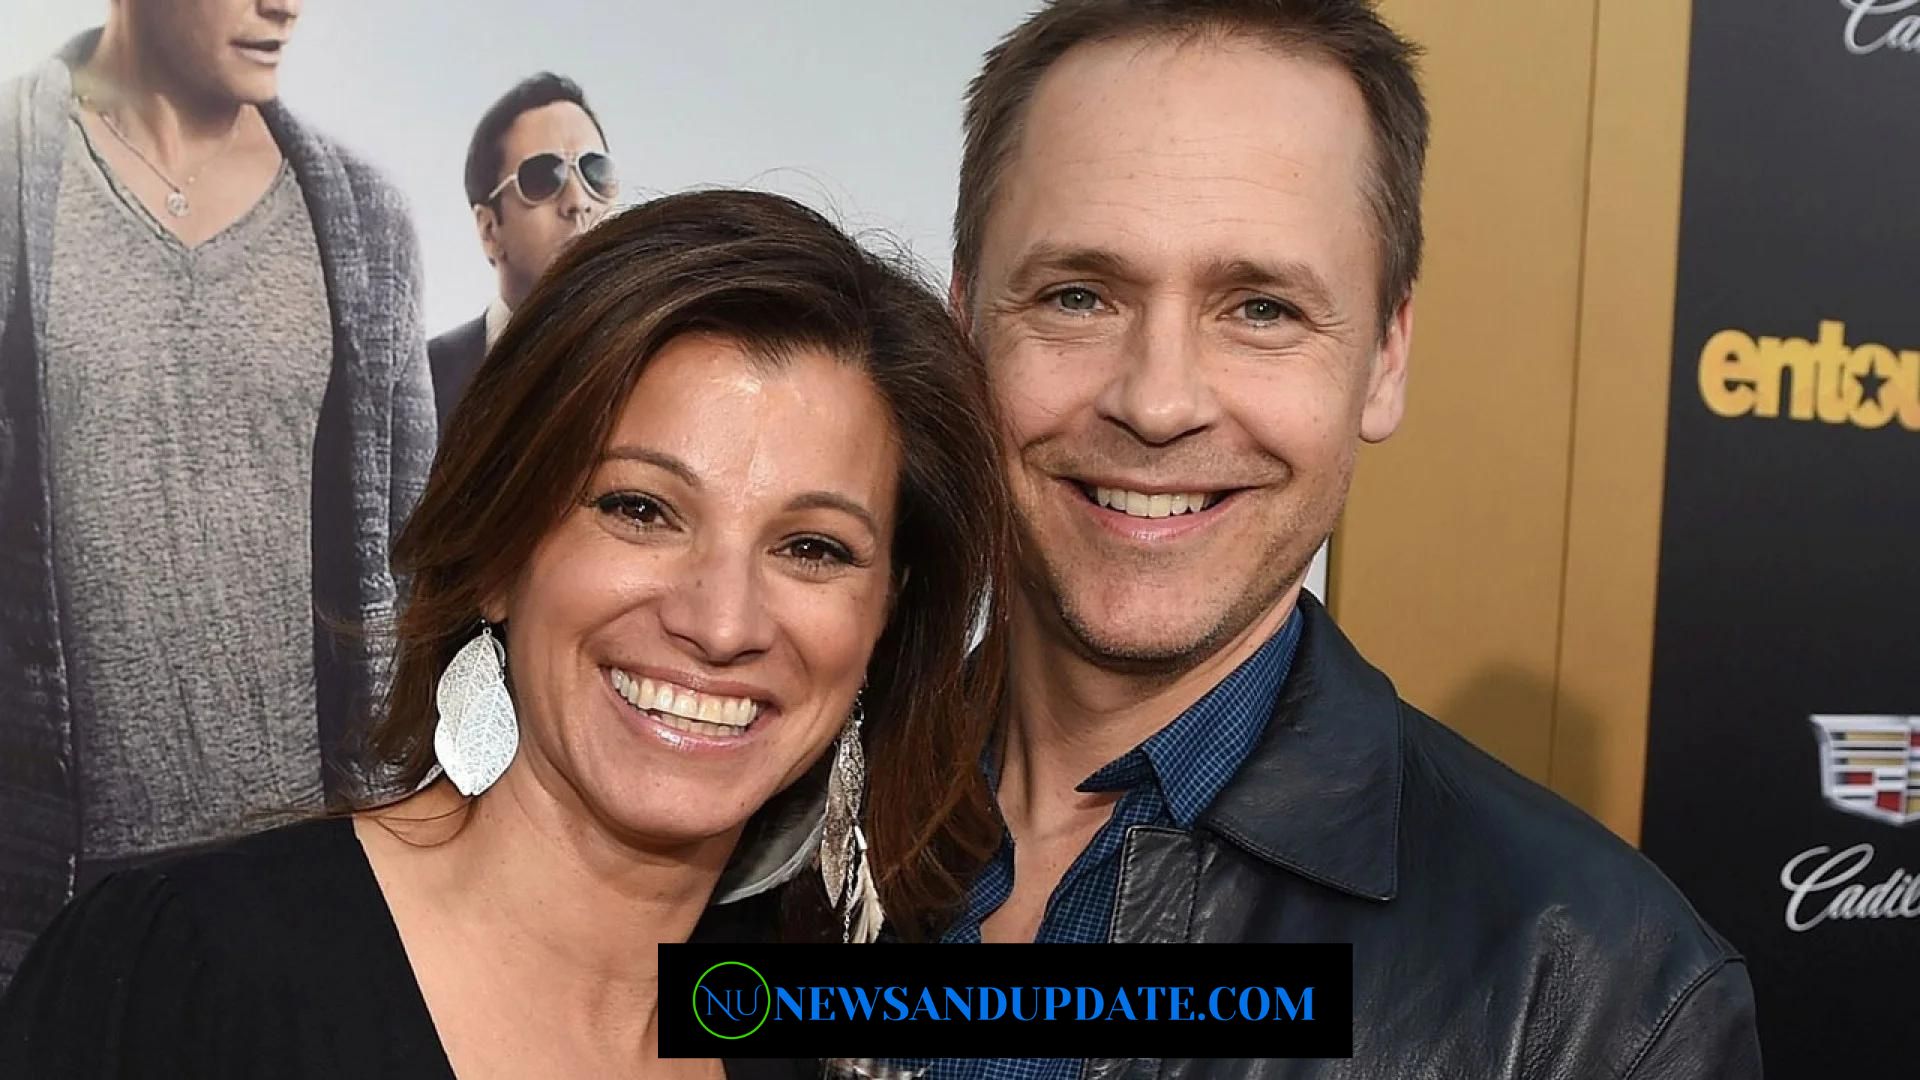 Know About Chad Lowe’s Wife, Kim Painter And Their Children!